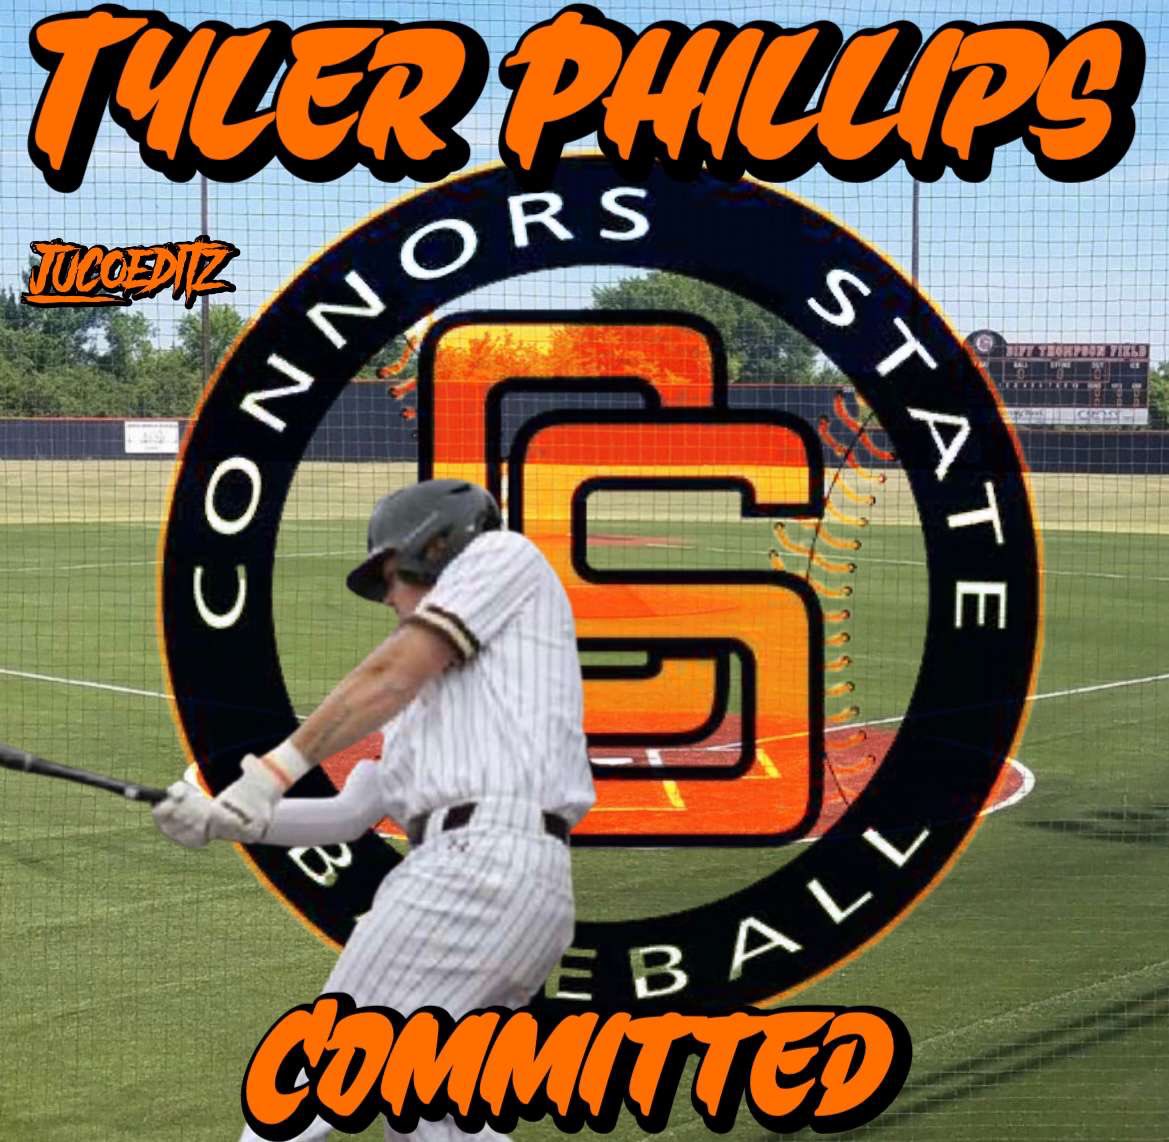 I'm excited to announce I'm going to further academic and athletic career at Connors state! @BuffSportsRadio @ConnorsBaseball